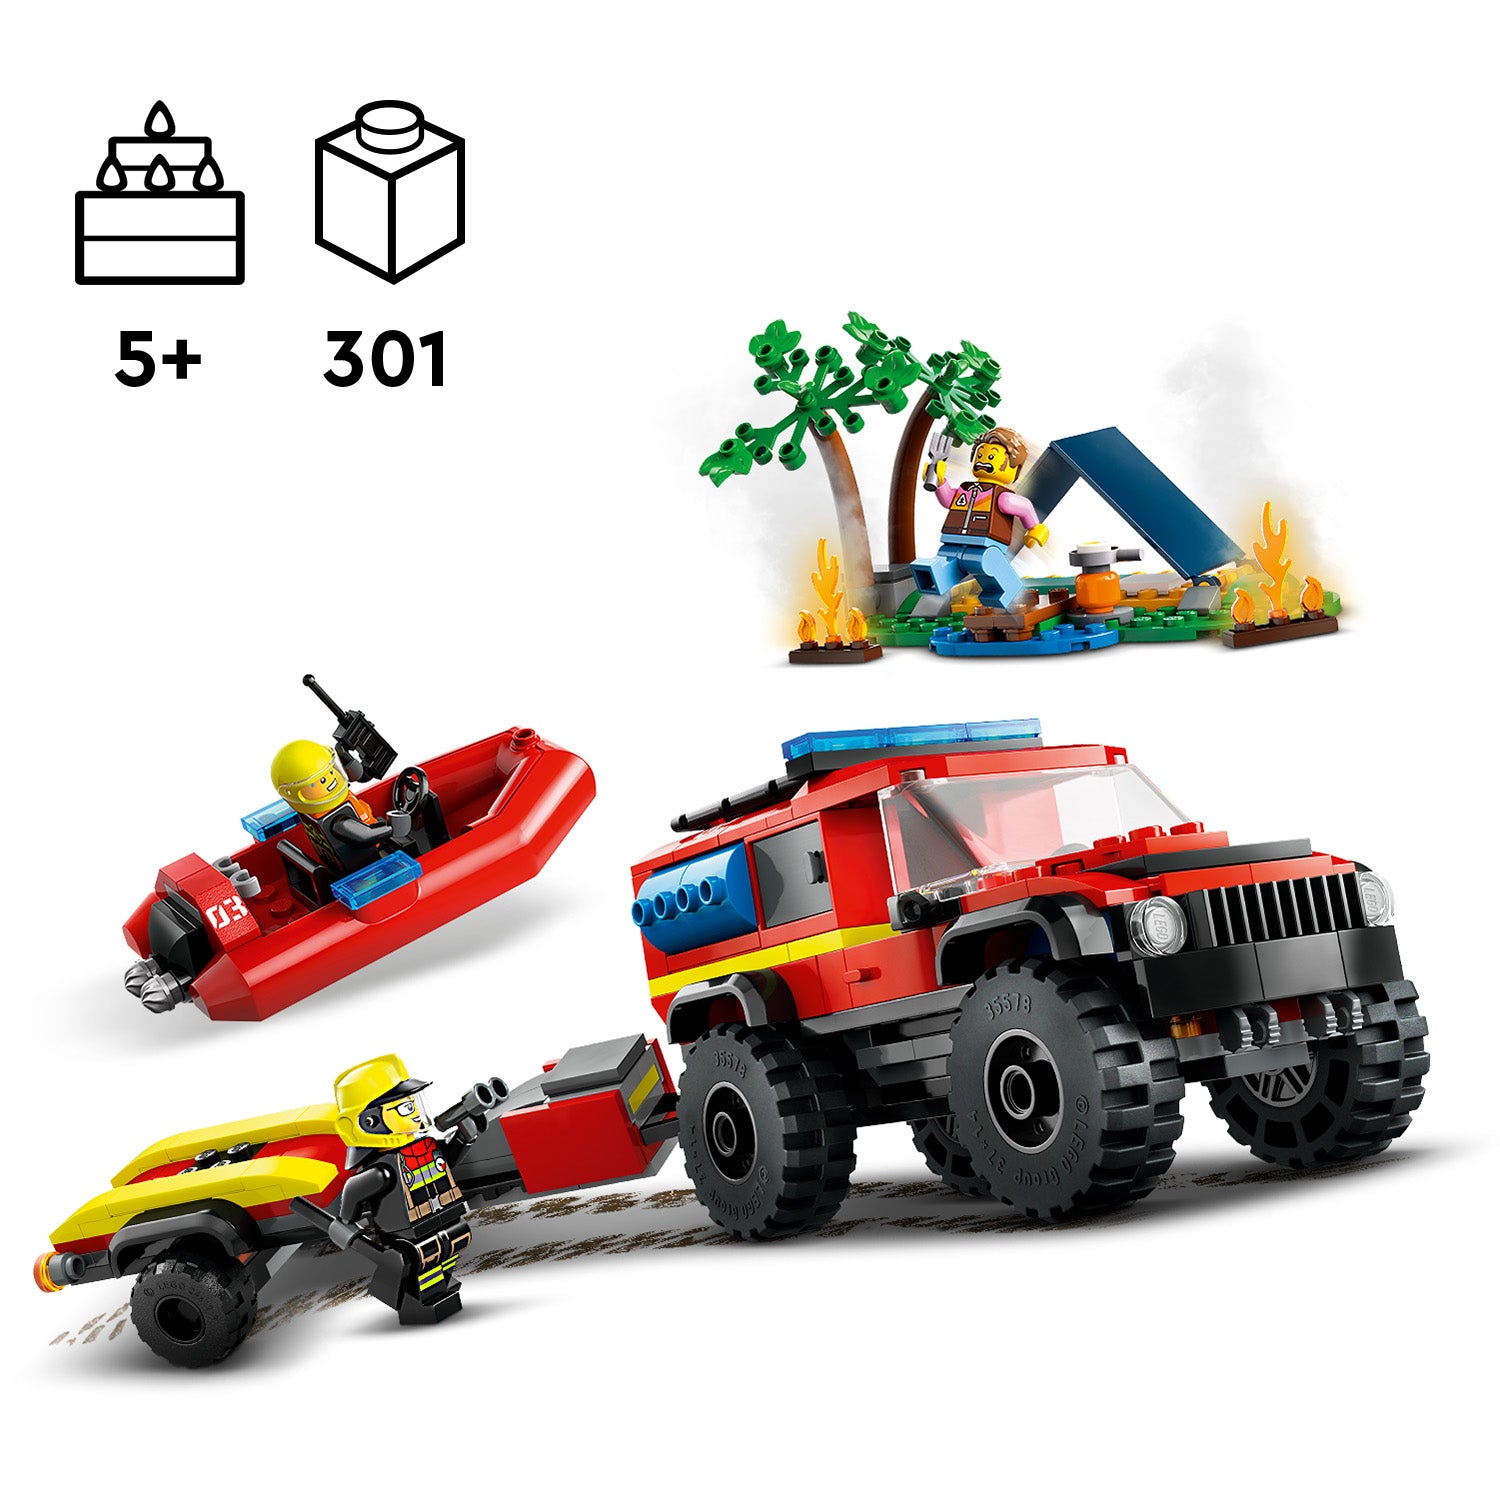 Lego 60412 4x4 Fire Truck with Rescue Boat